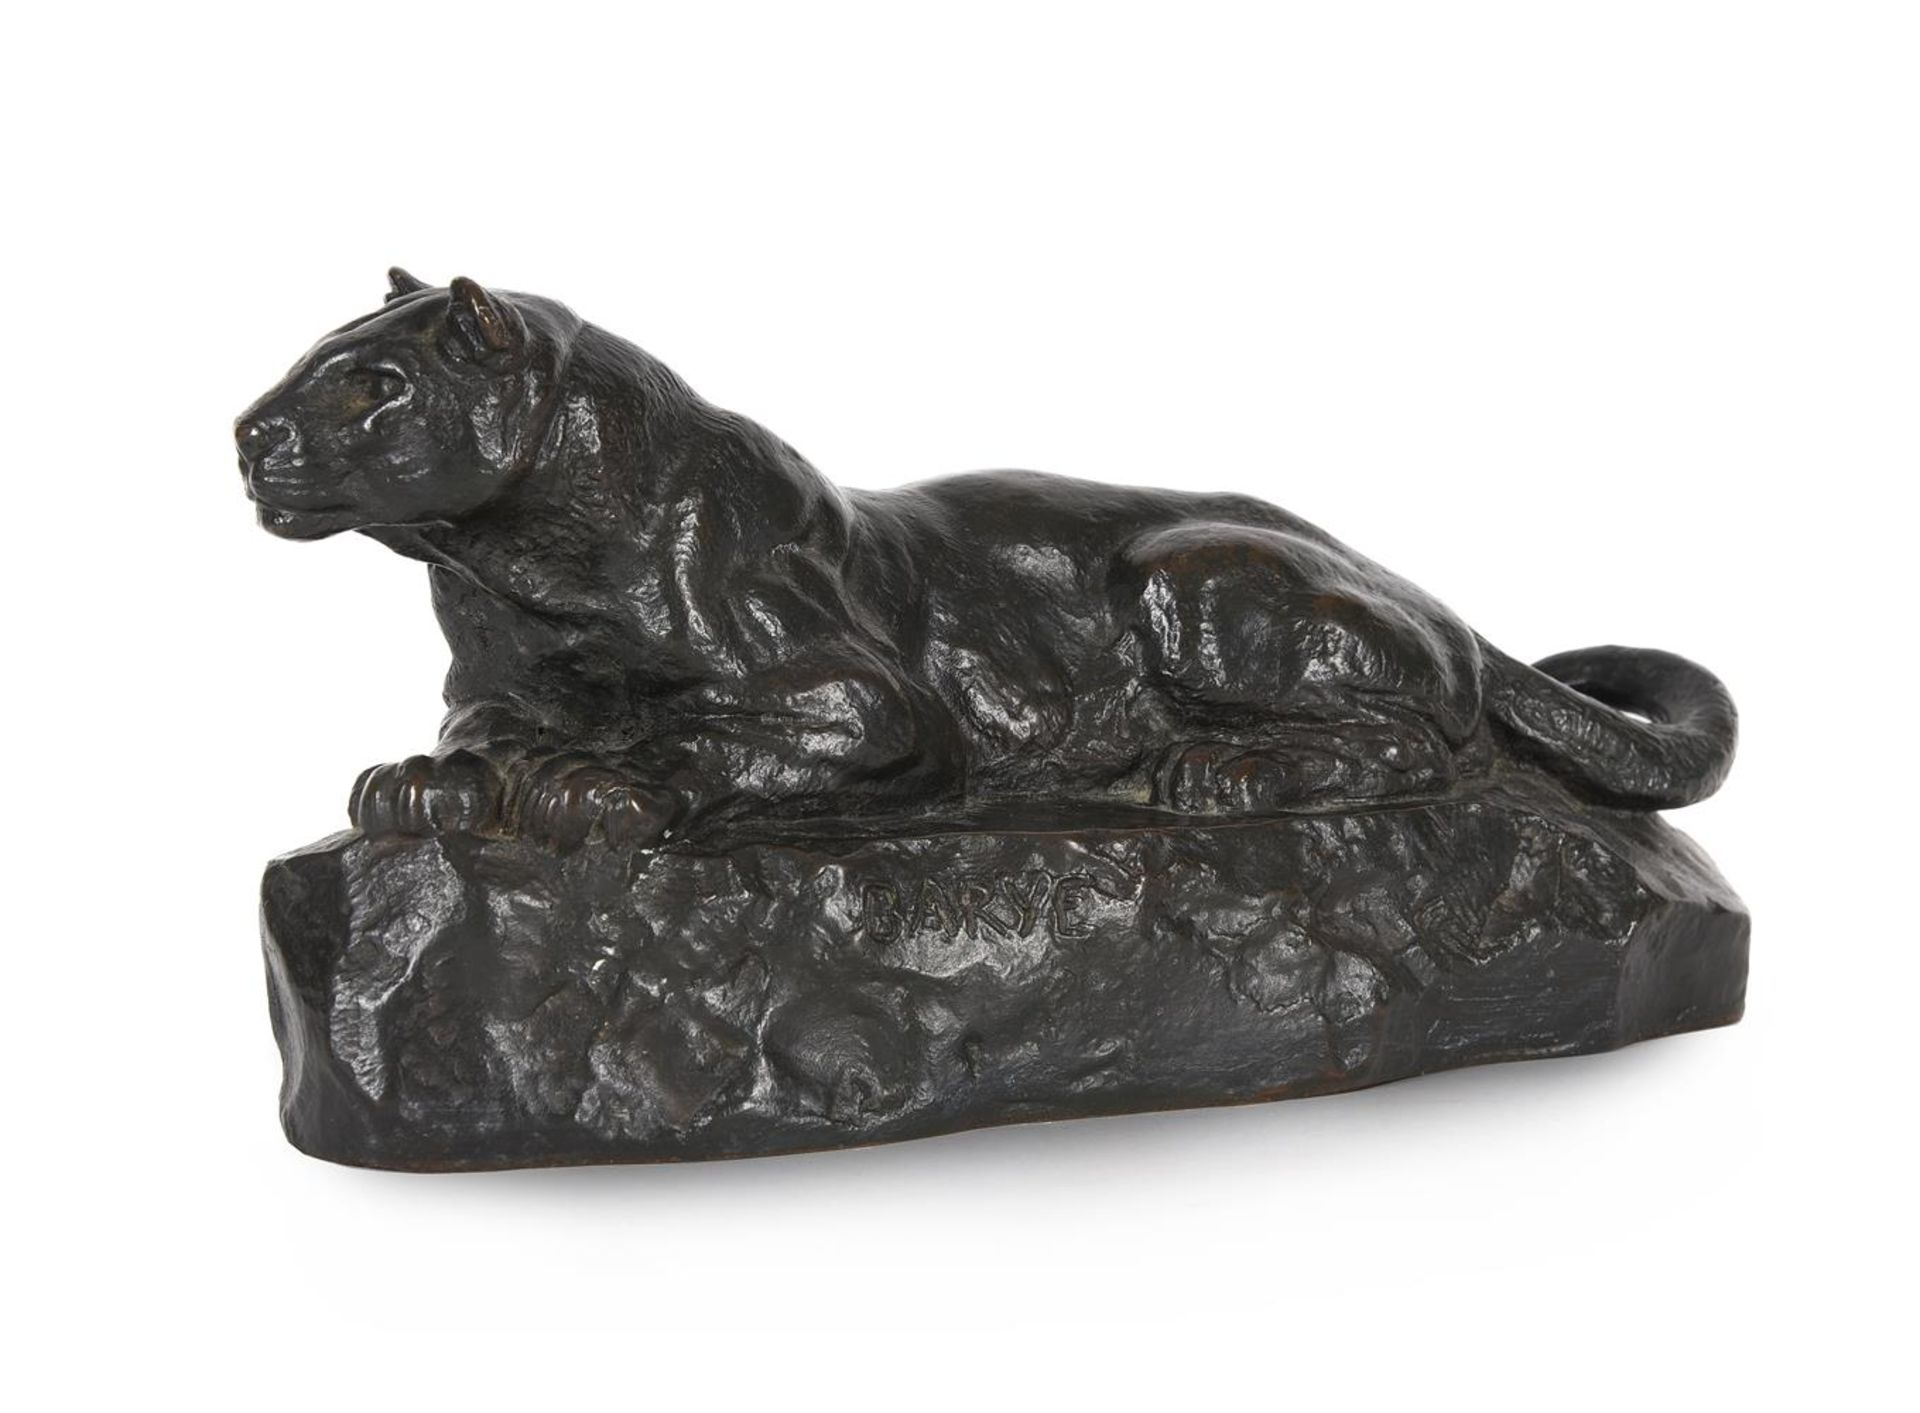 ANTOINE-LOUIS BARYE (1795-1875), A BARBEDIENNE ANIMALIER BRONZE OF A RECUMBENT PANTHER